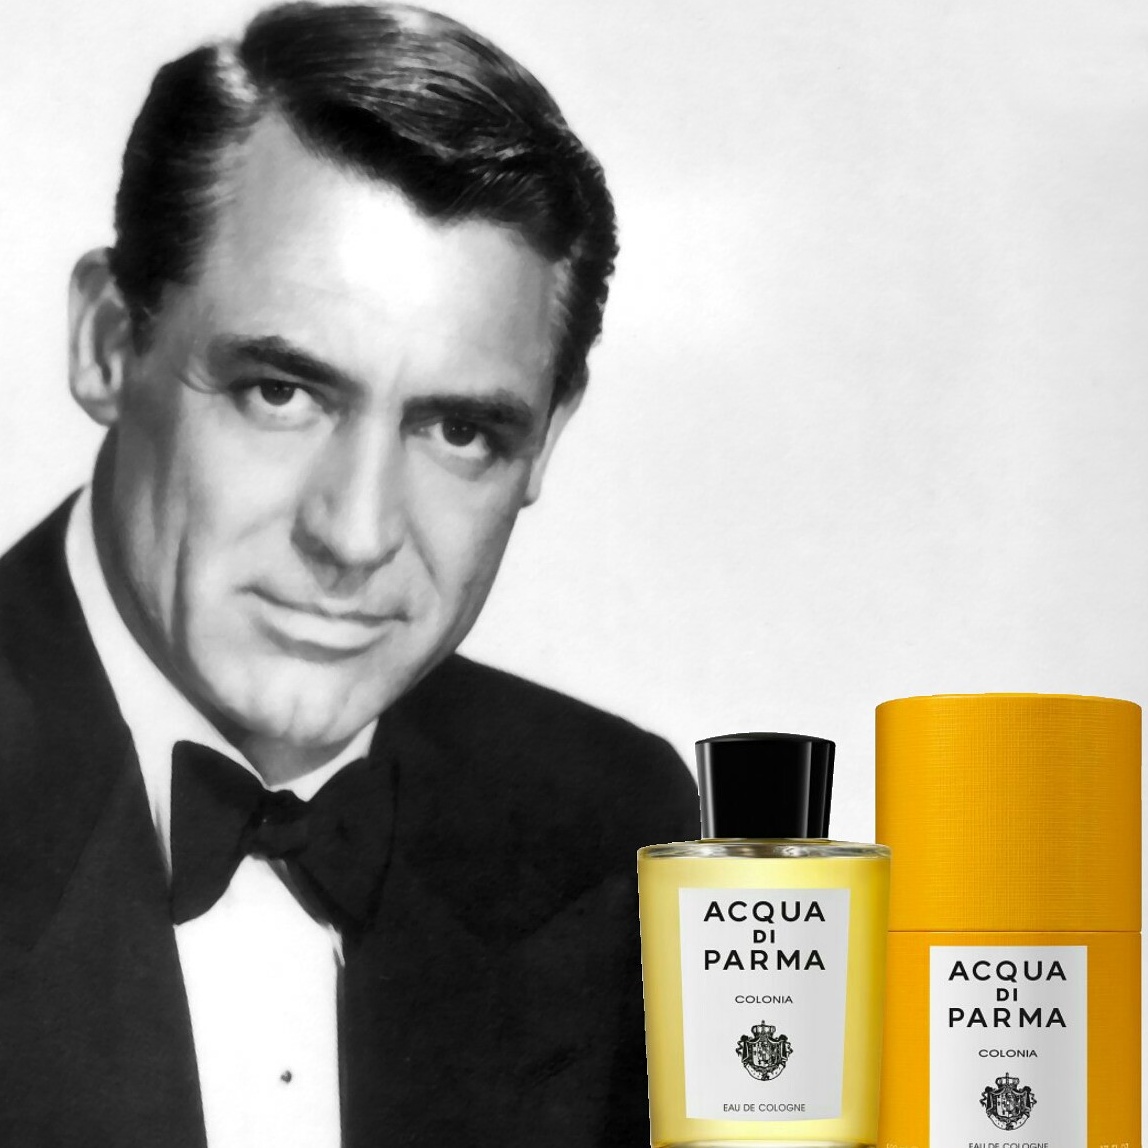 Timeless, classic perfumes and their 